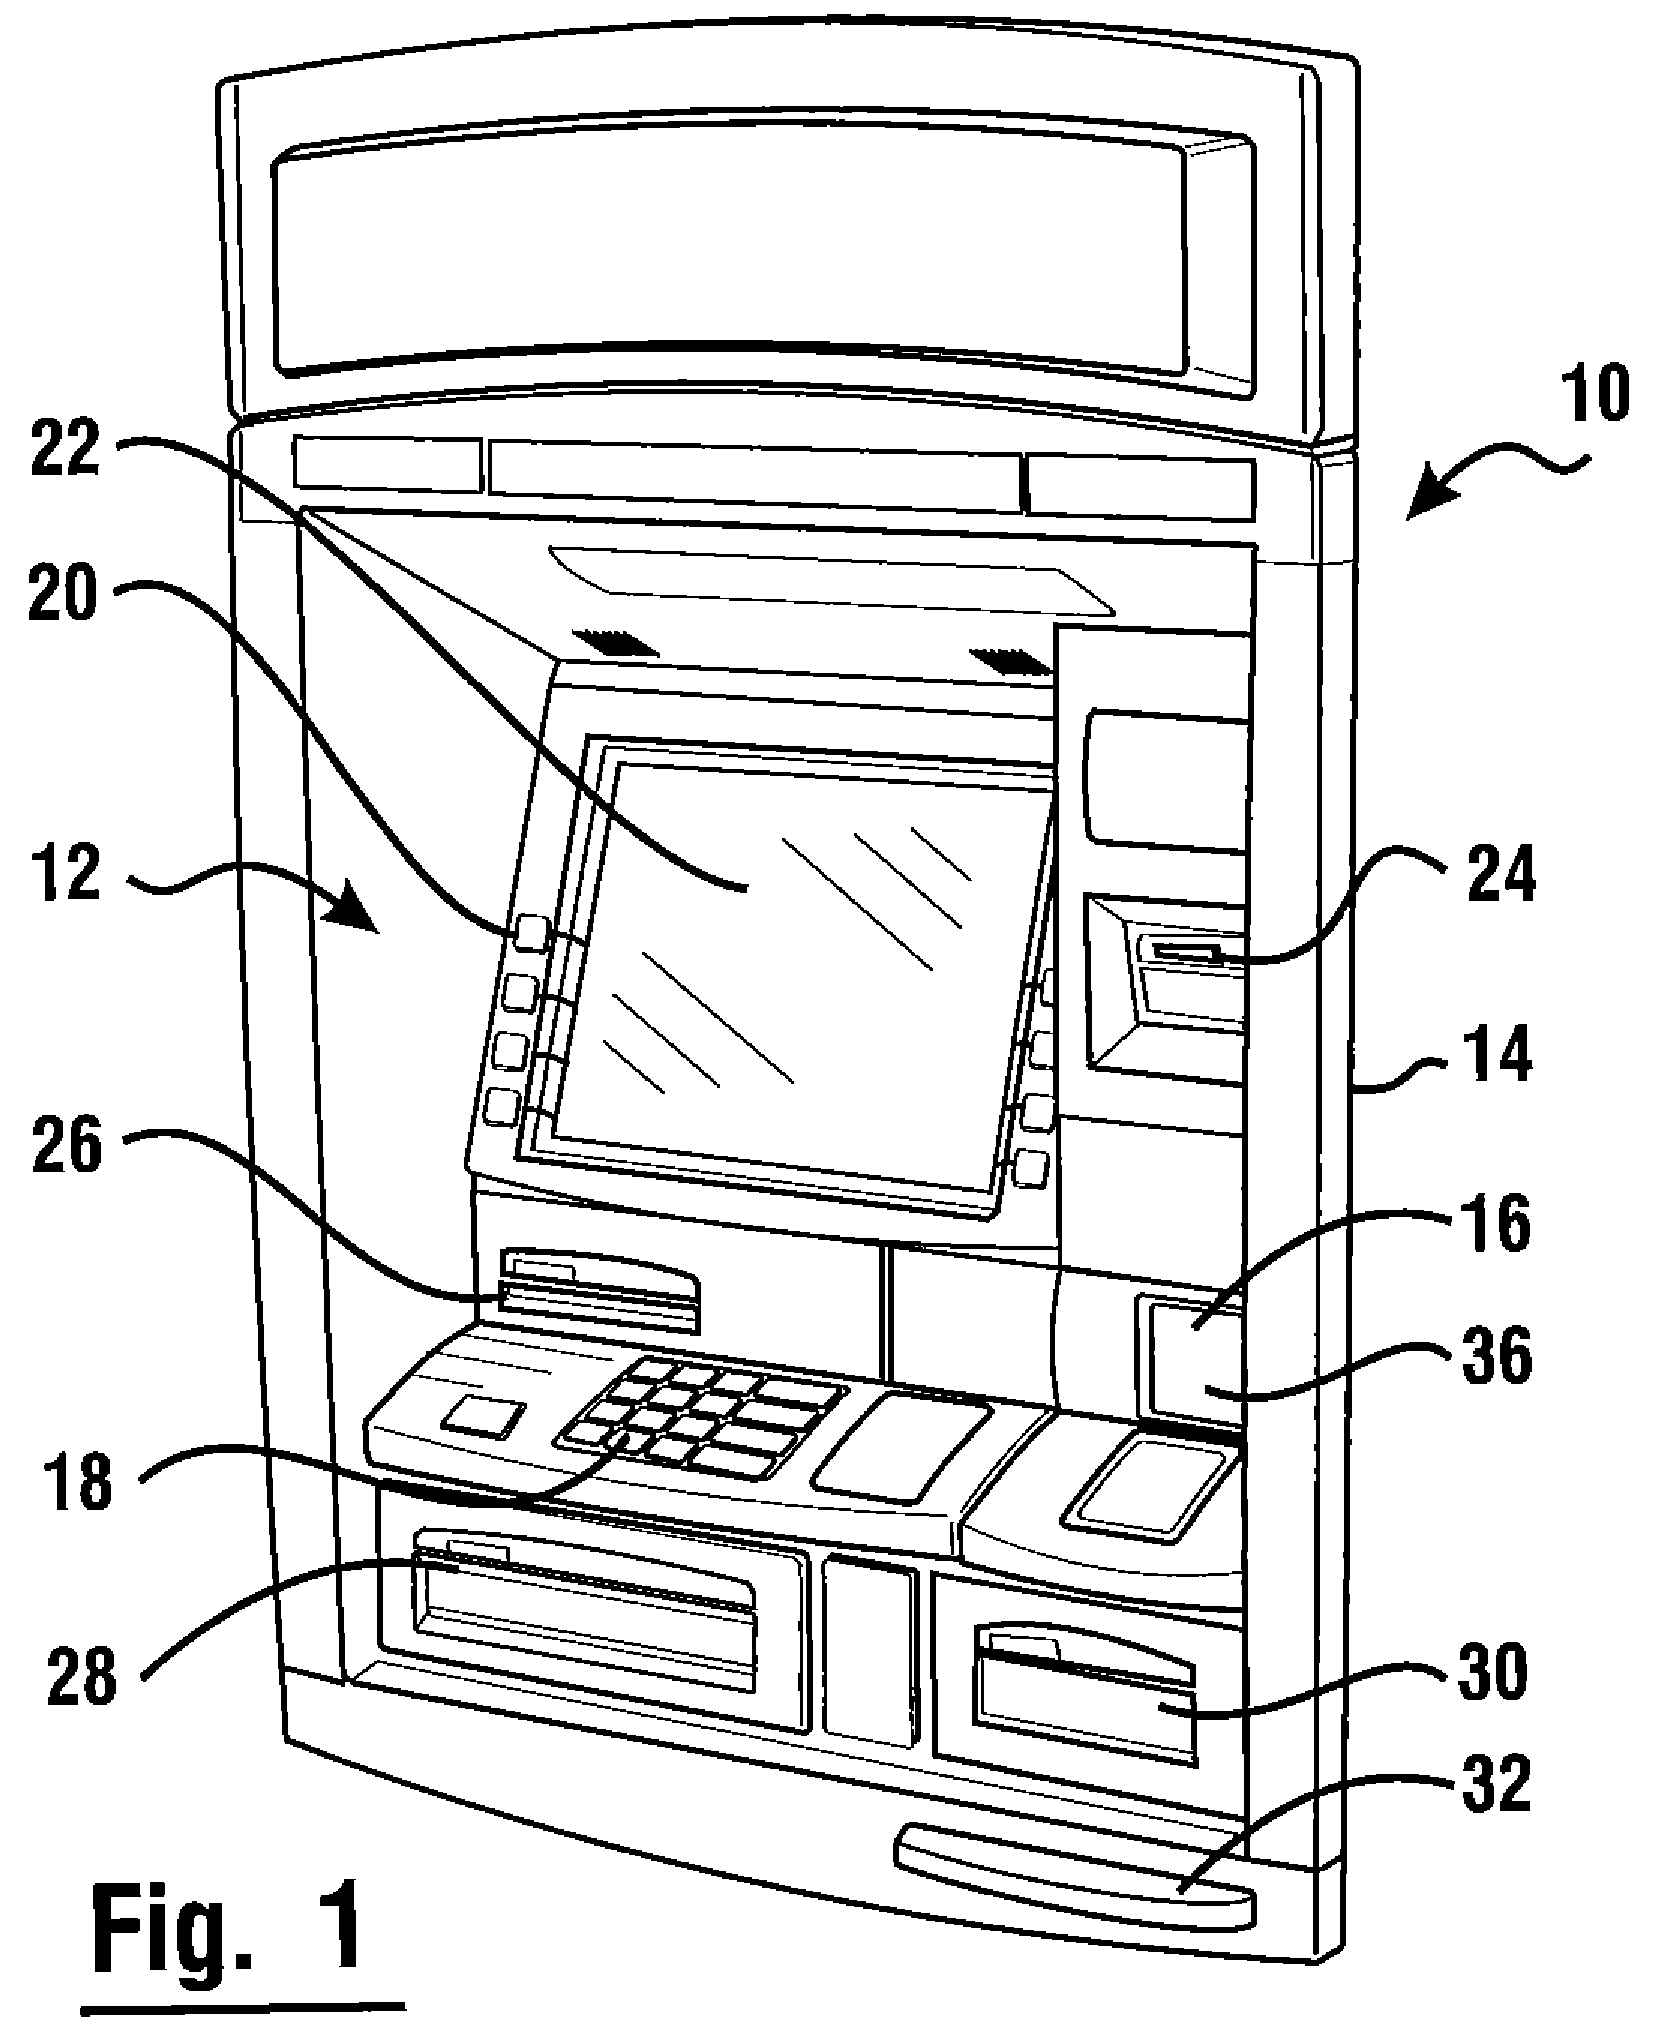 Banking machine controlled responsive to data read from data bearing records